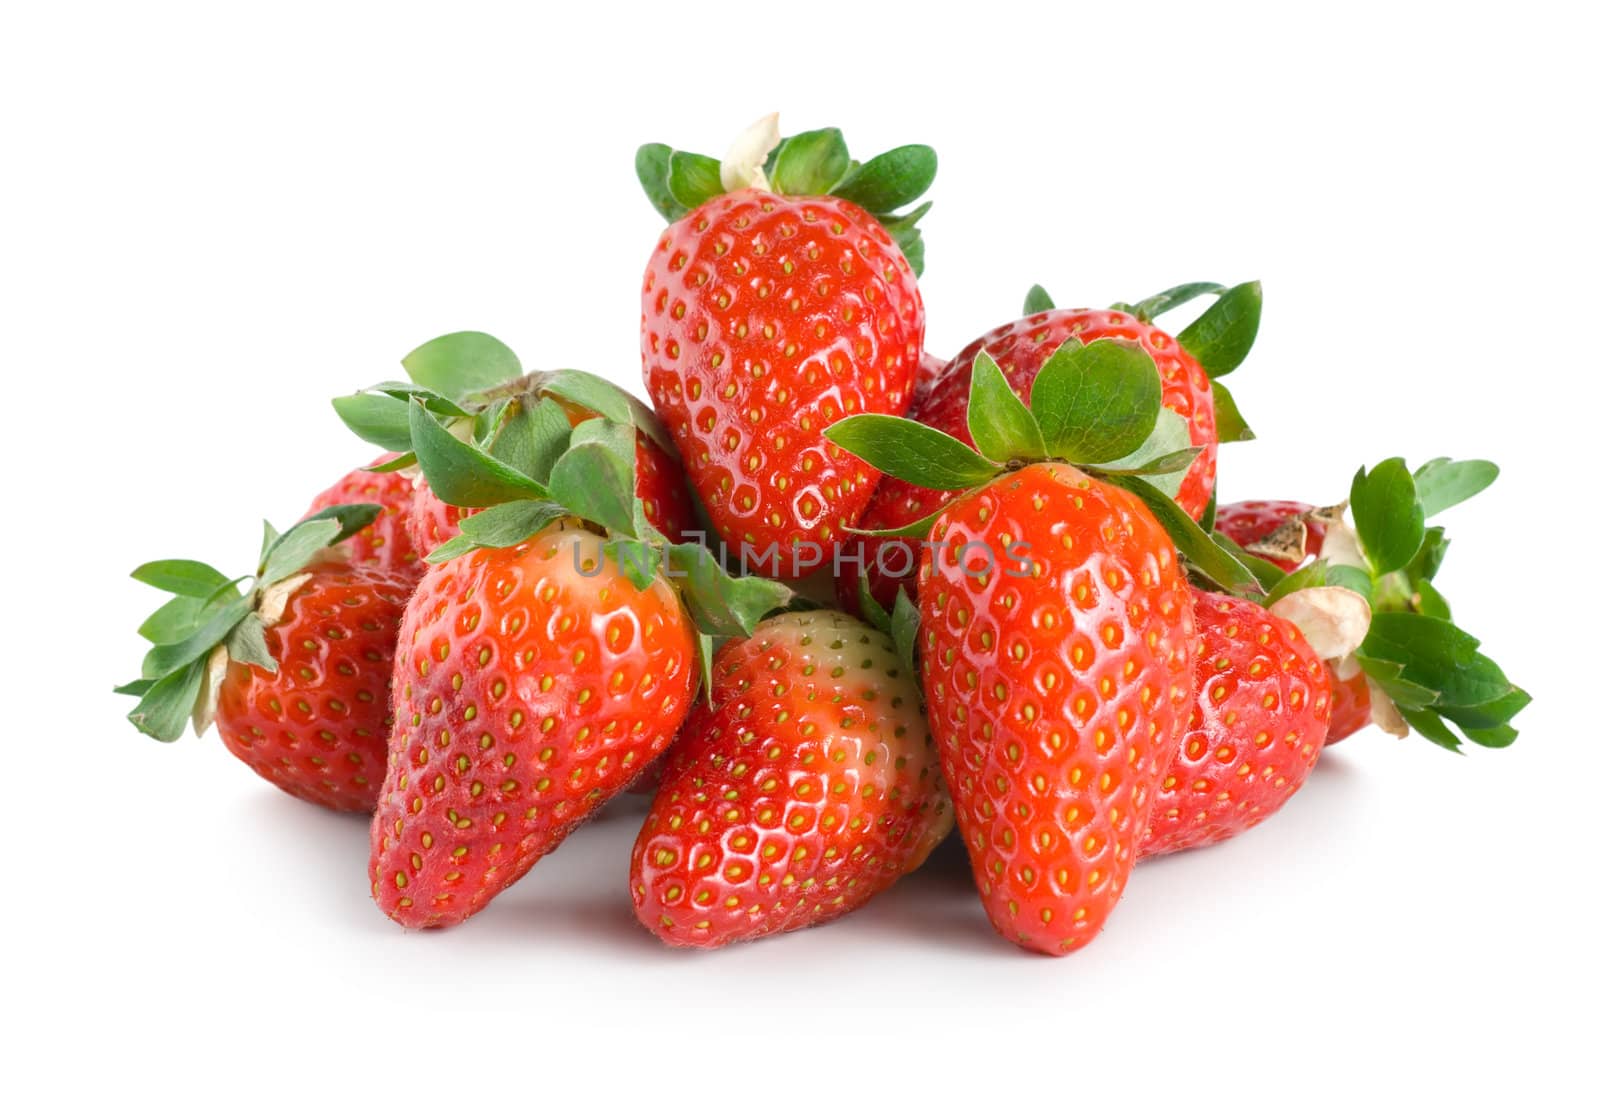 Juicy strawberries isolated on a white background